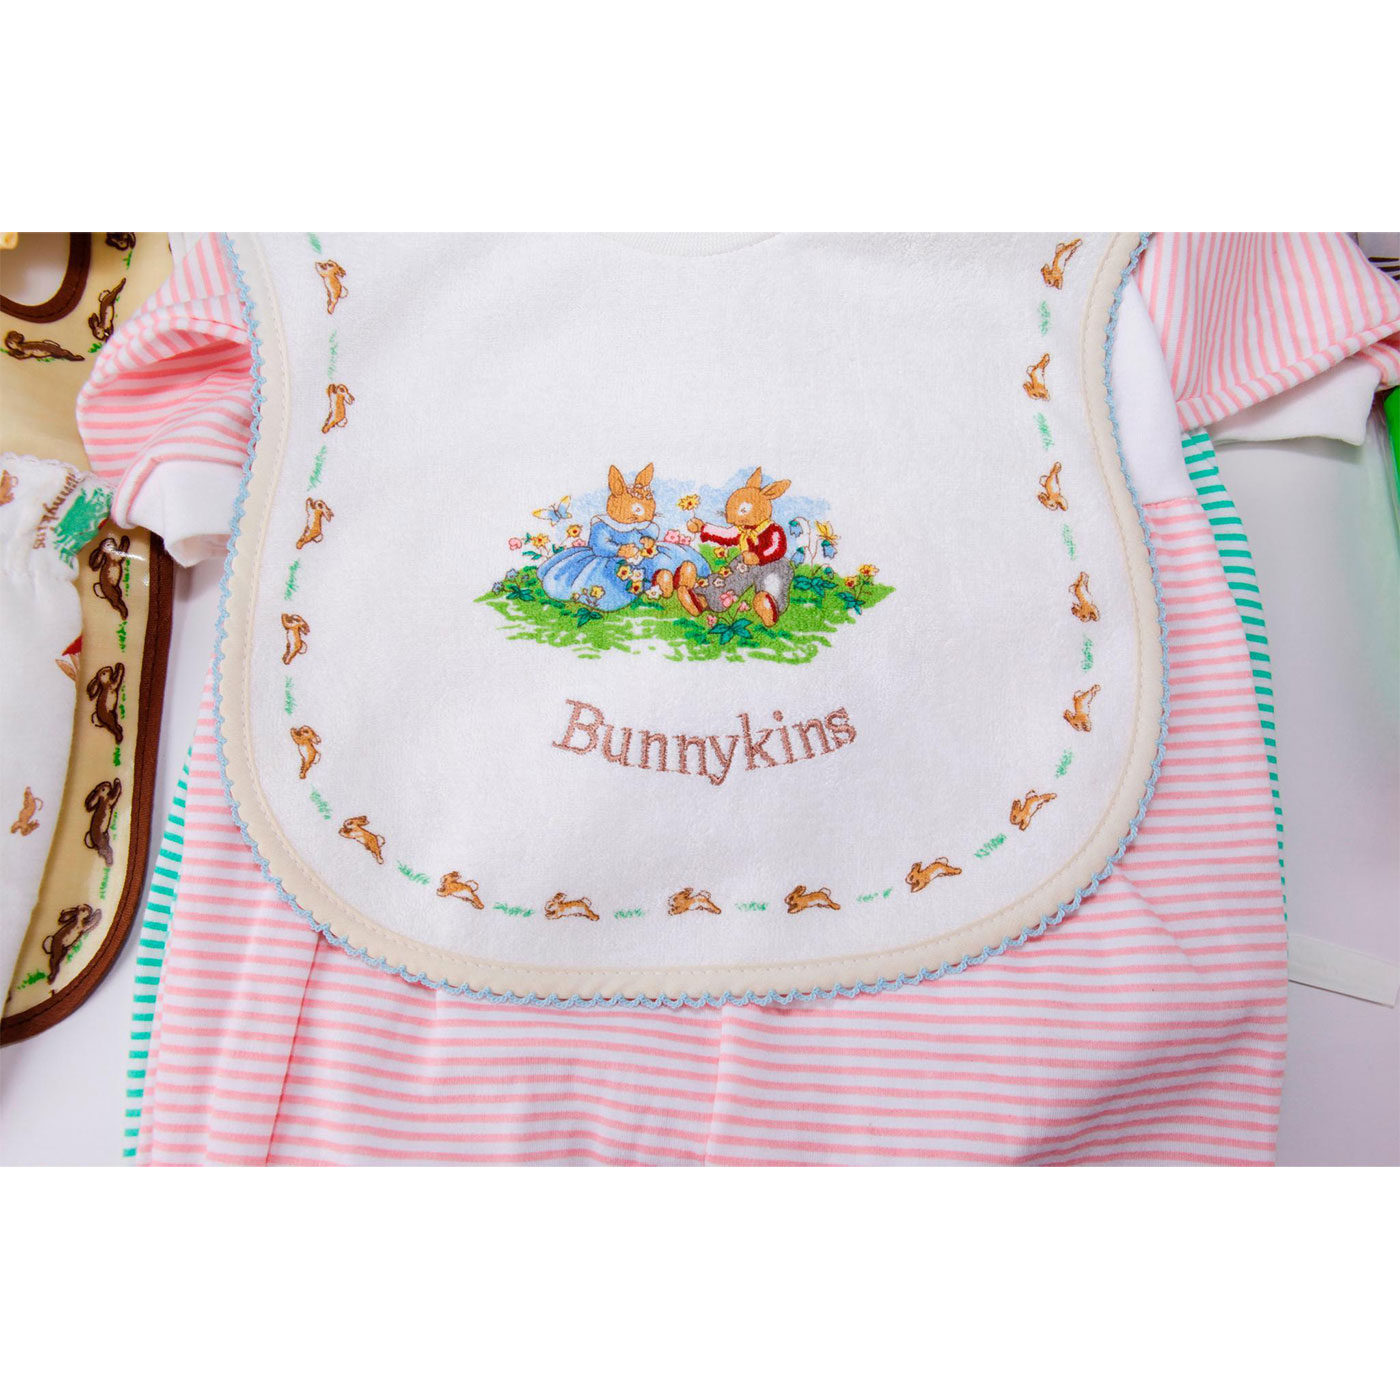 ROYAL DOULTON BUNNYKINS BABY CLOTHING AND ACCESSORIES - Image 2 of 8